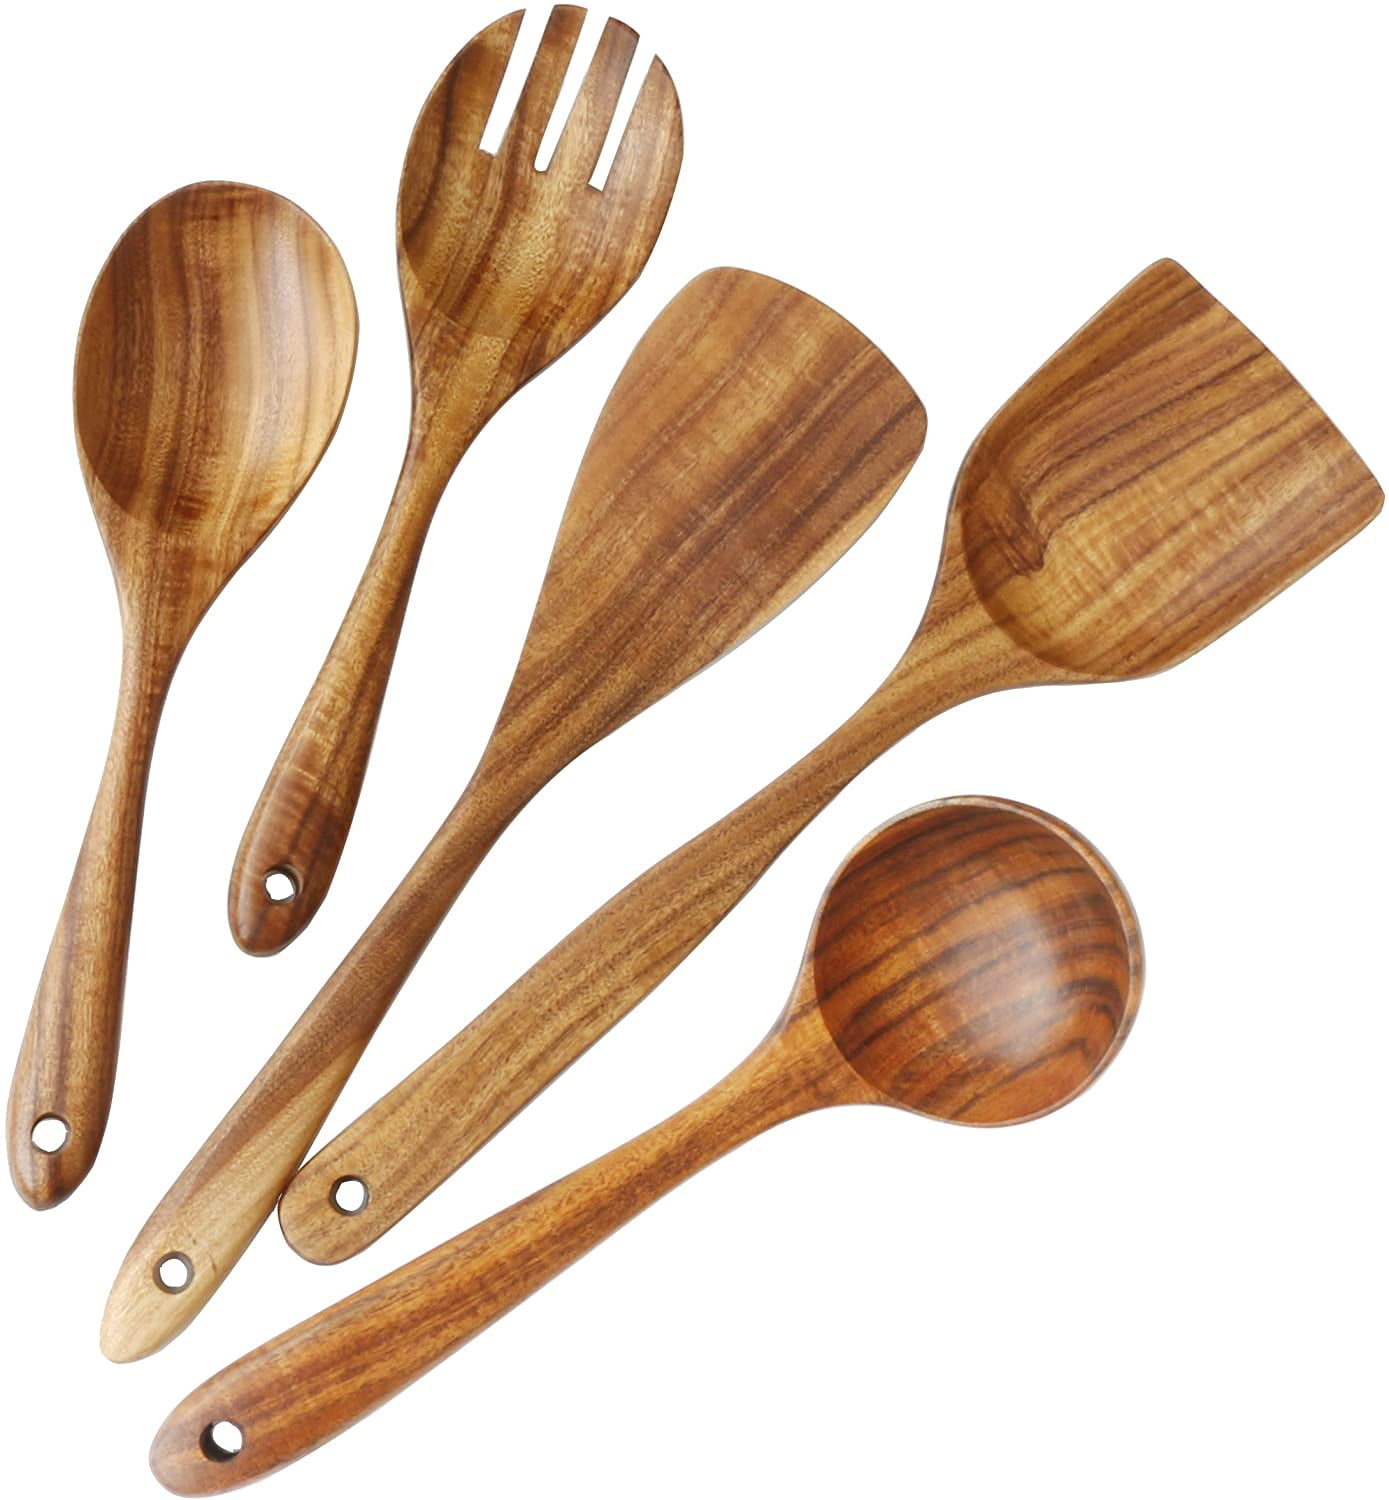 Cooking wooden spoon, wooden cookware and non-stick cookware, 5